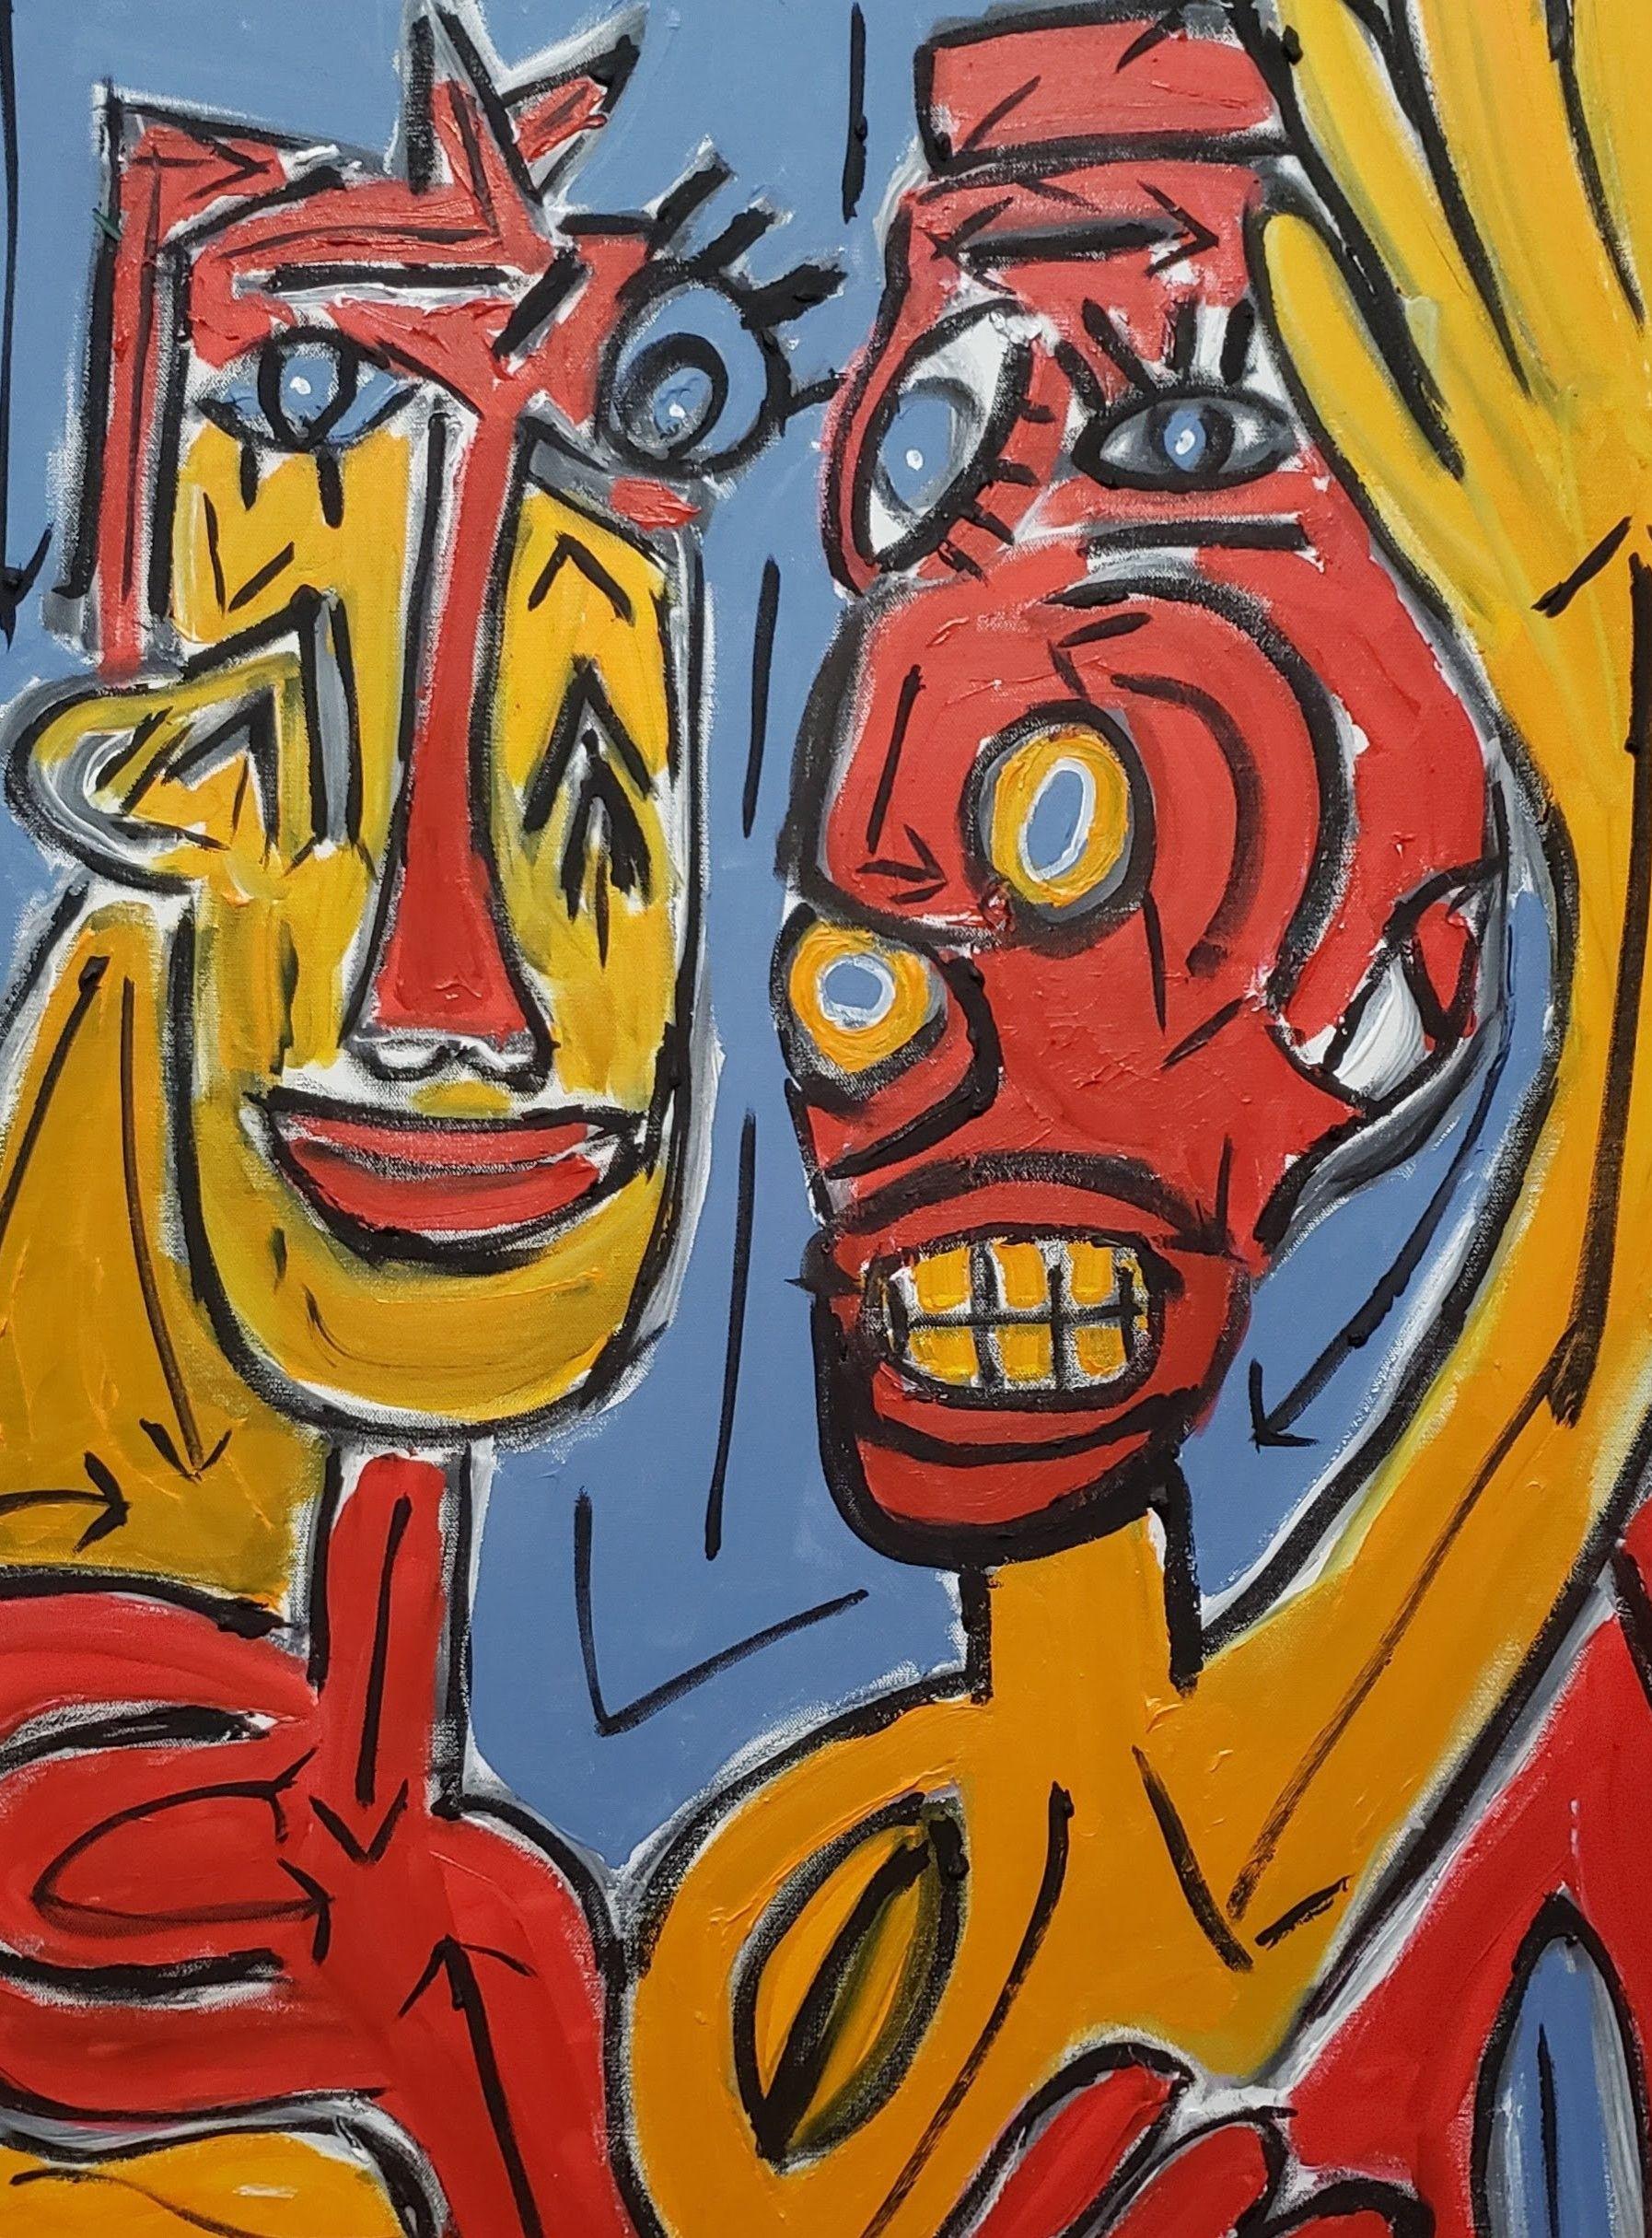 The painting depicts the year 2020 and the confusion, anxiety, despair, distress and the the overall state of ambivalence the world was experiencing.  The arrows going in different directions denote the ambivalence and chaos around us. The discord